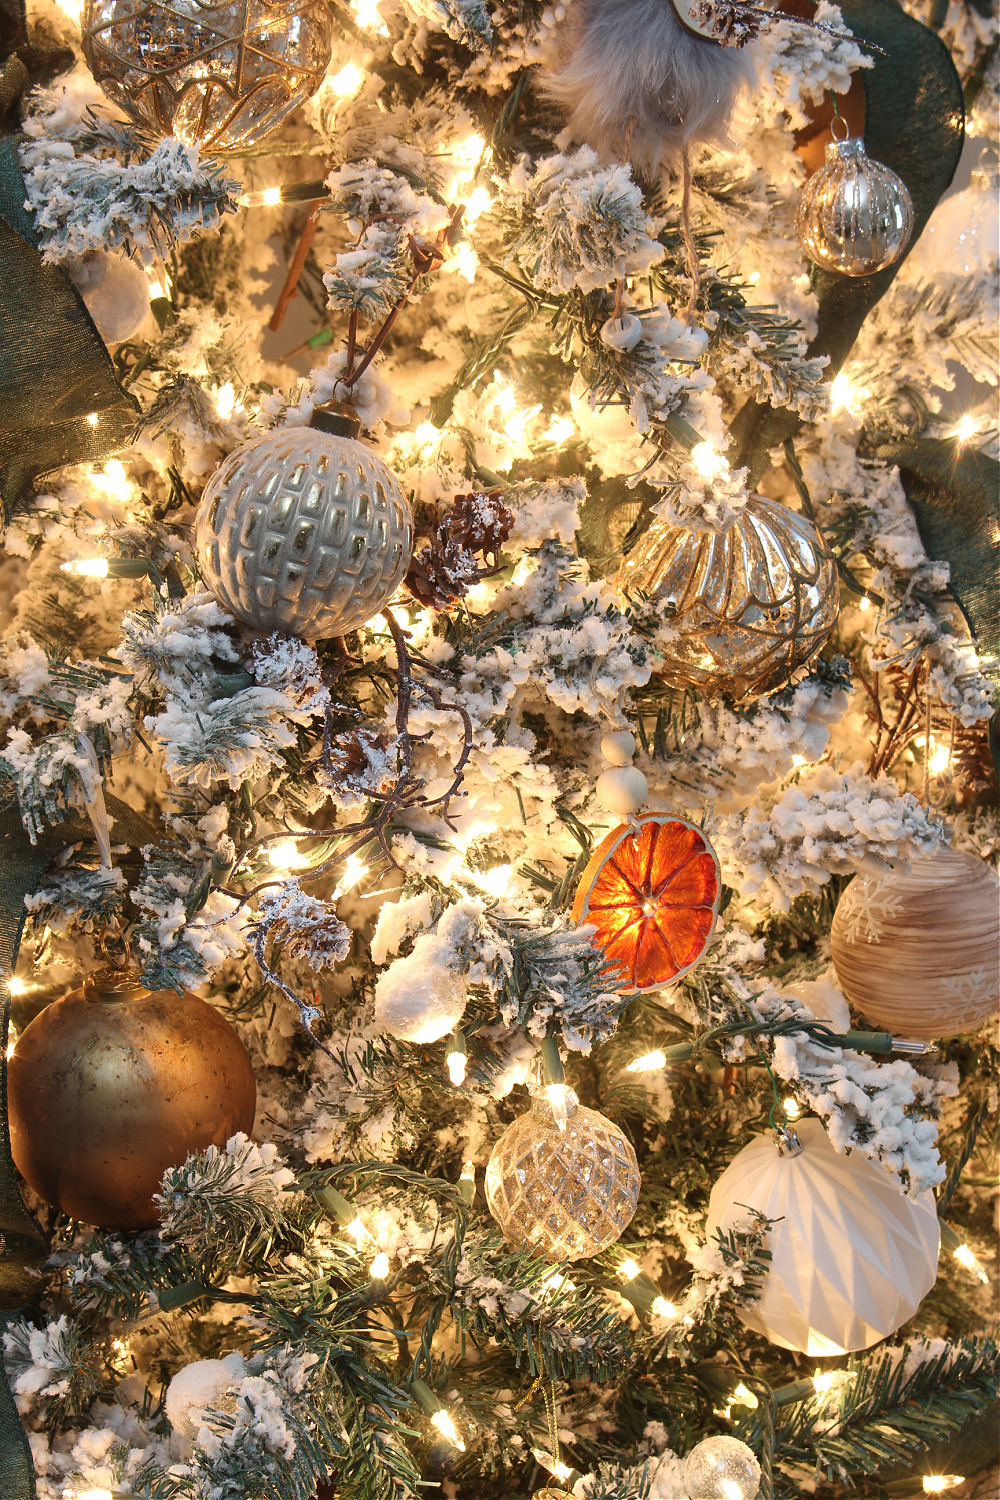 Metallic Christmas tree ornaments and dry orange ornaments are illuminated by Christmas lights.